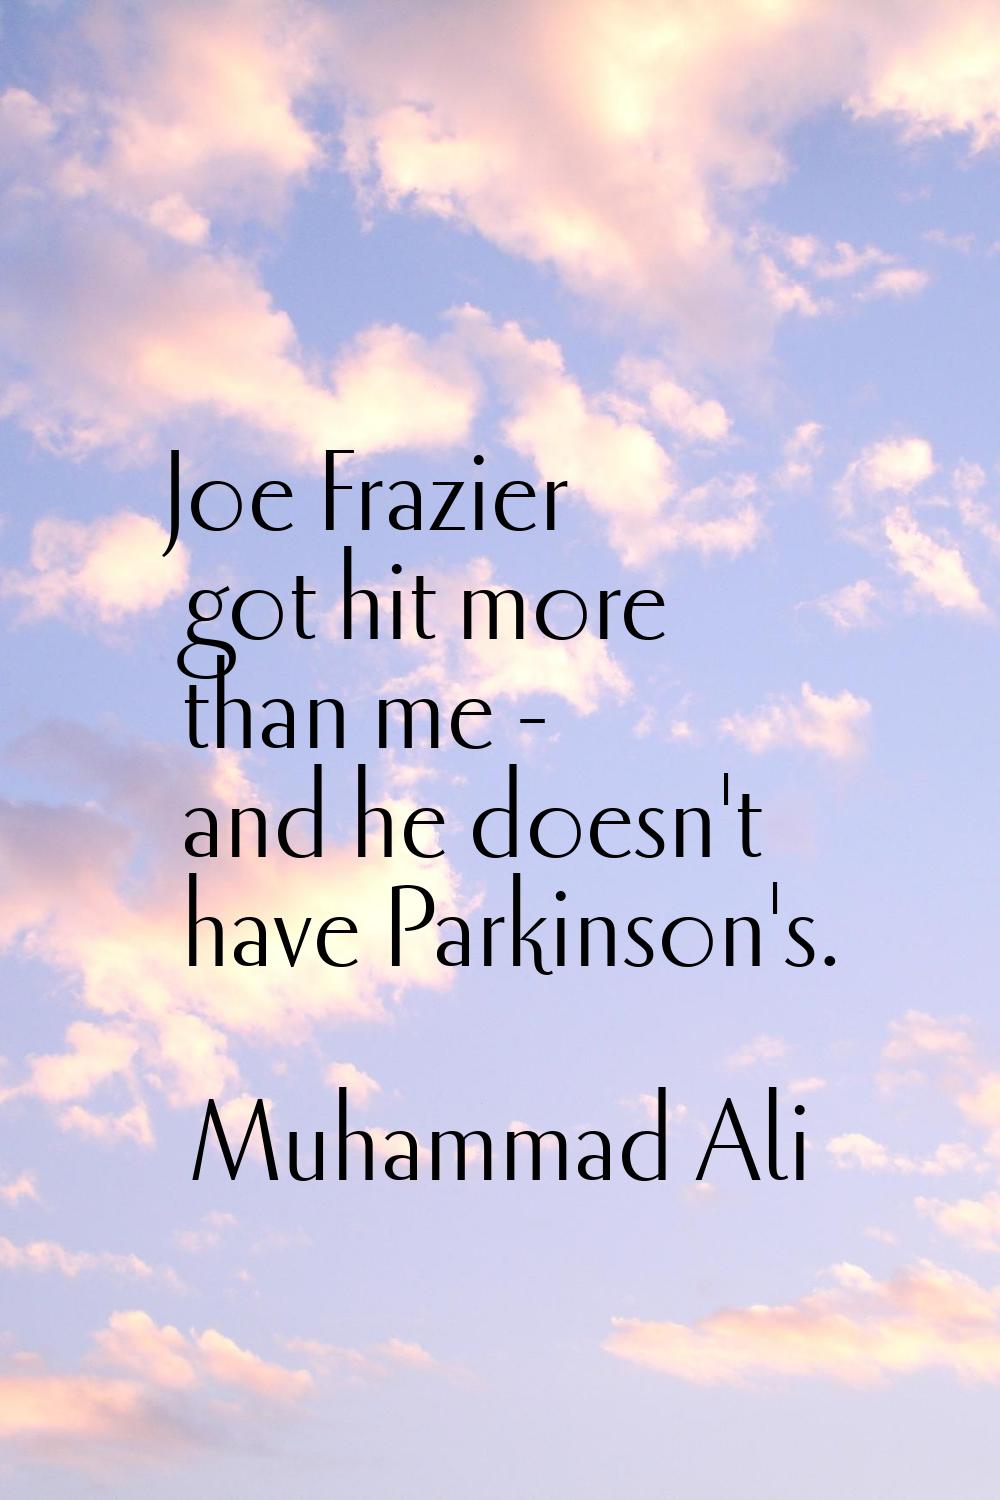 Joe Frazier got hit more than me - and he doesn't have Parkinson's.